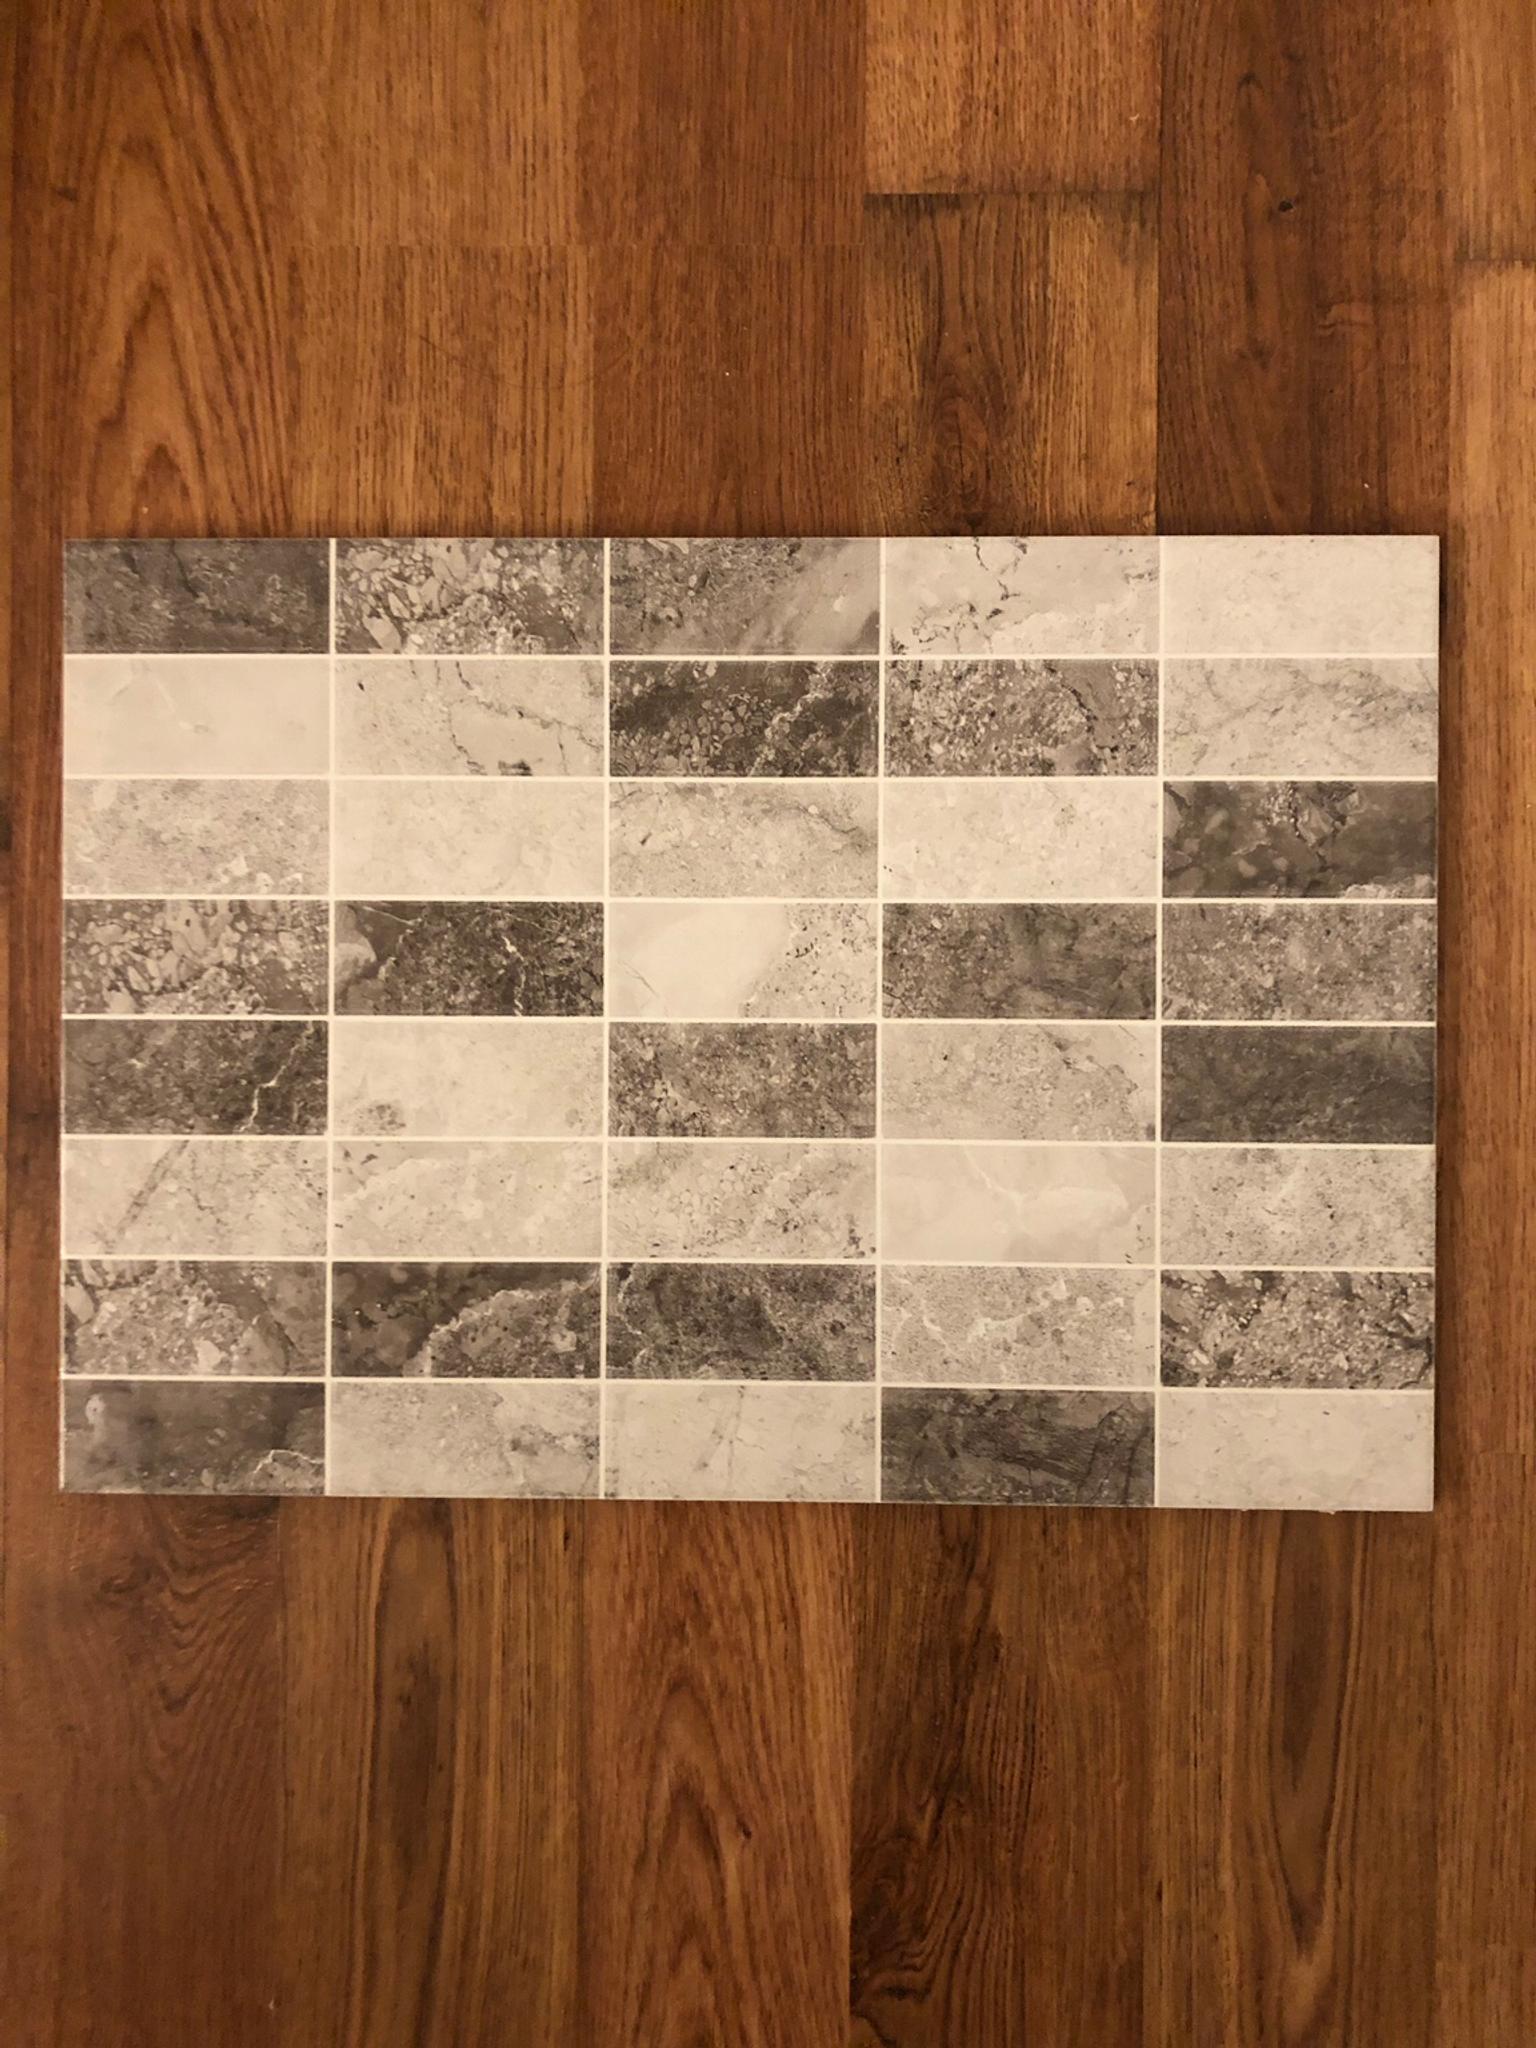 Marble Effect Large Kitchen Bathroom Tiles In L11 Liverpool Fur 20